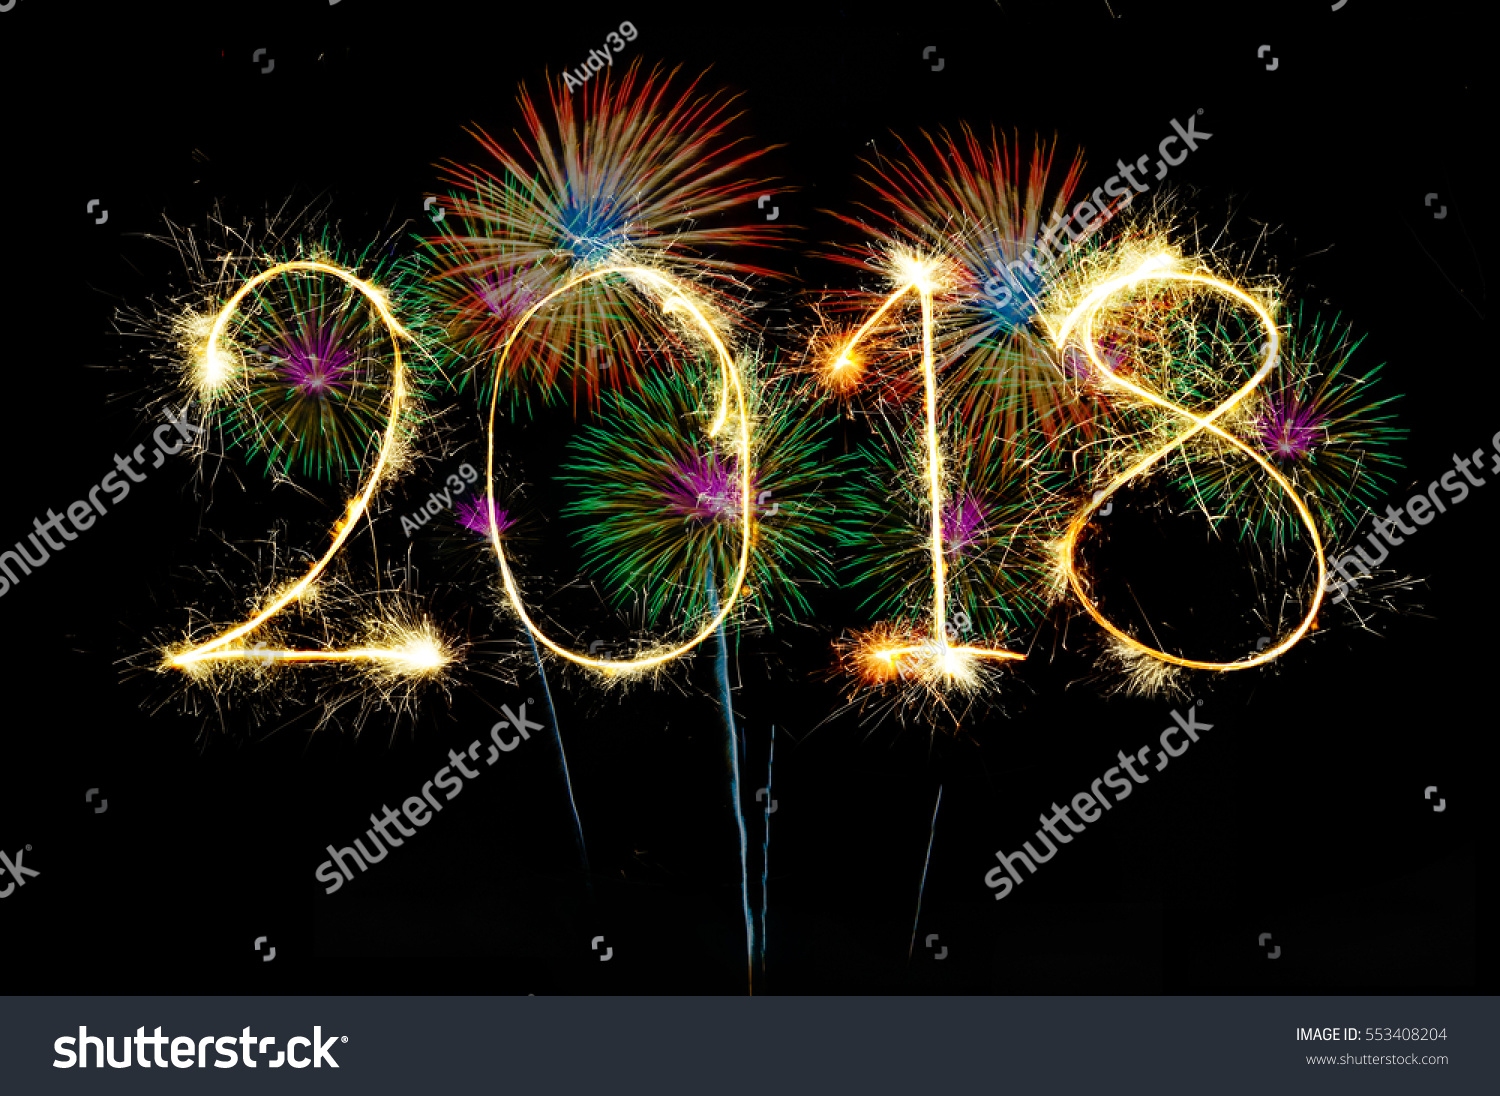 HAPPY NEW YEAR 2018 from colorful sparkle on black background Fireworks light up the sky,New Year celebration fireworks #553408204